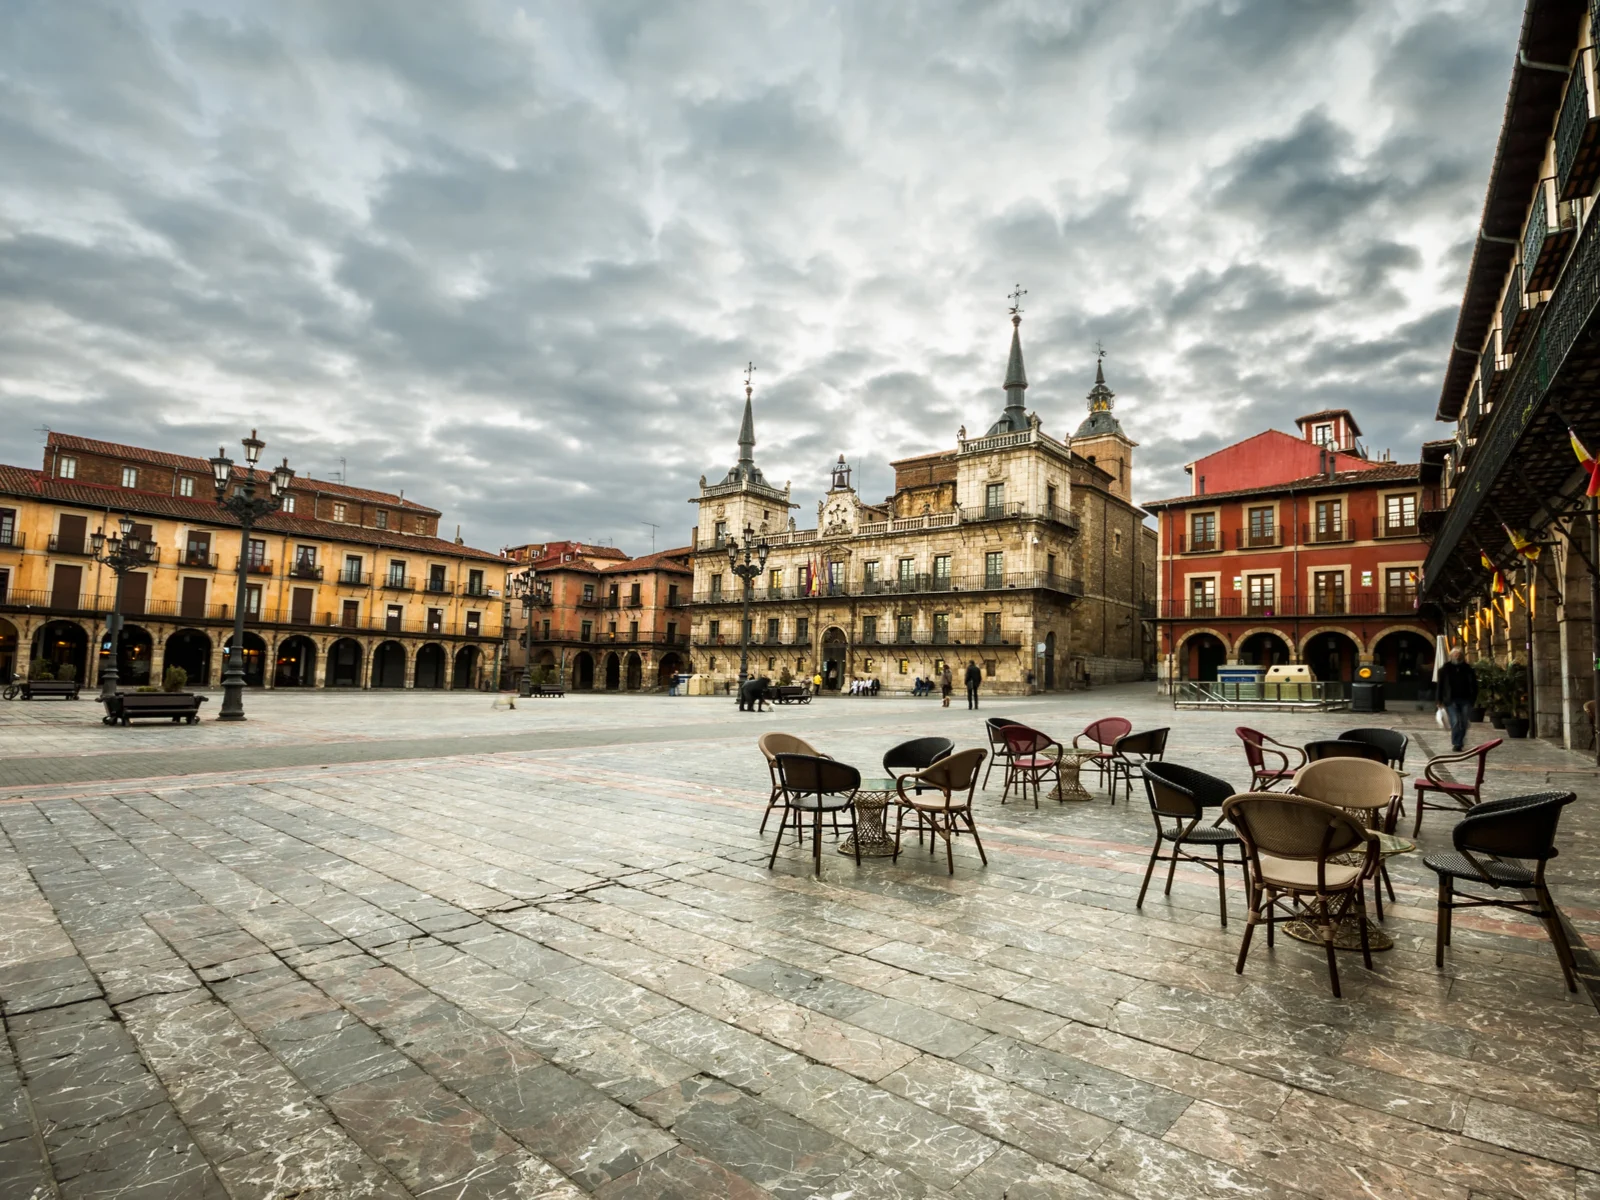 Rainy day in the plaza of Leon, Castilla during the worst time to visit Spain